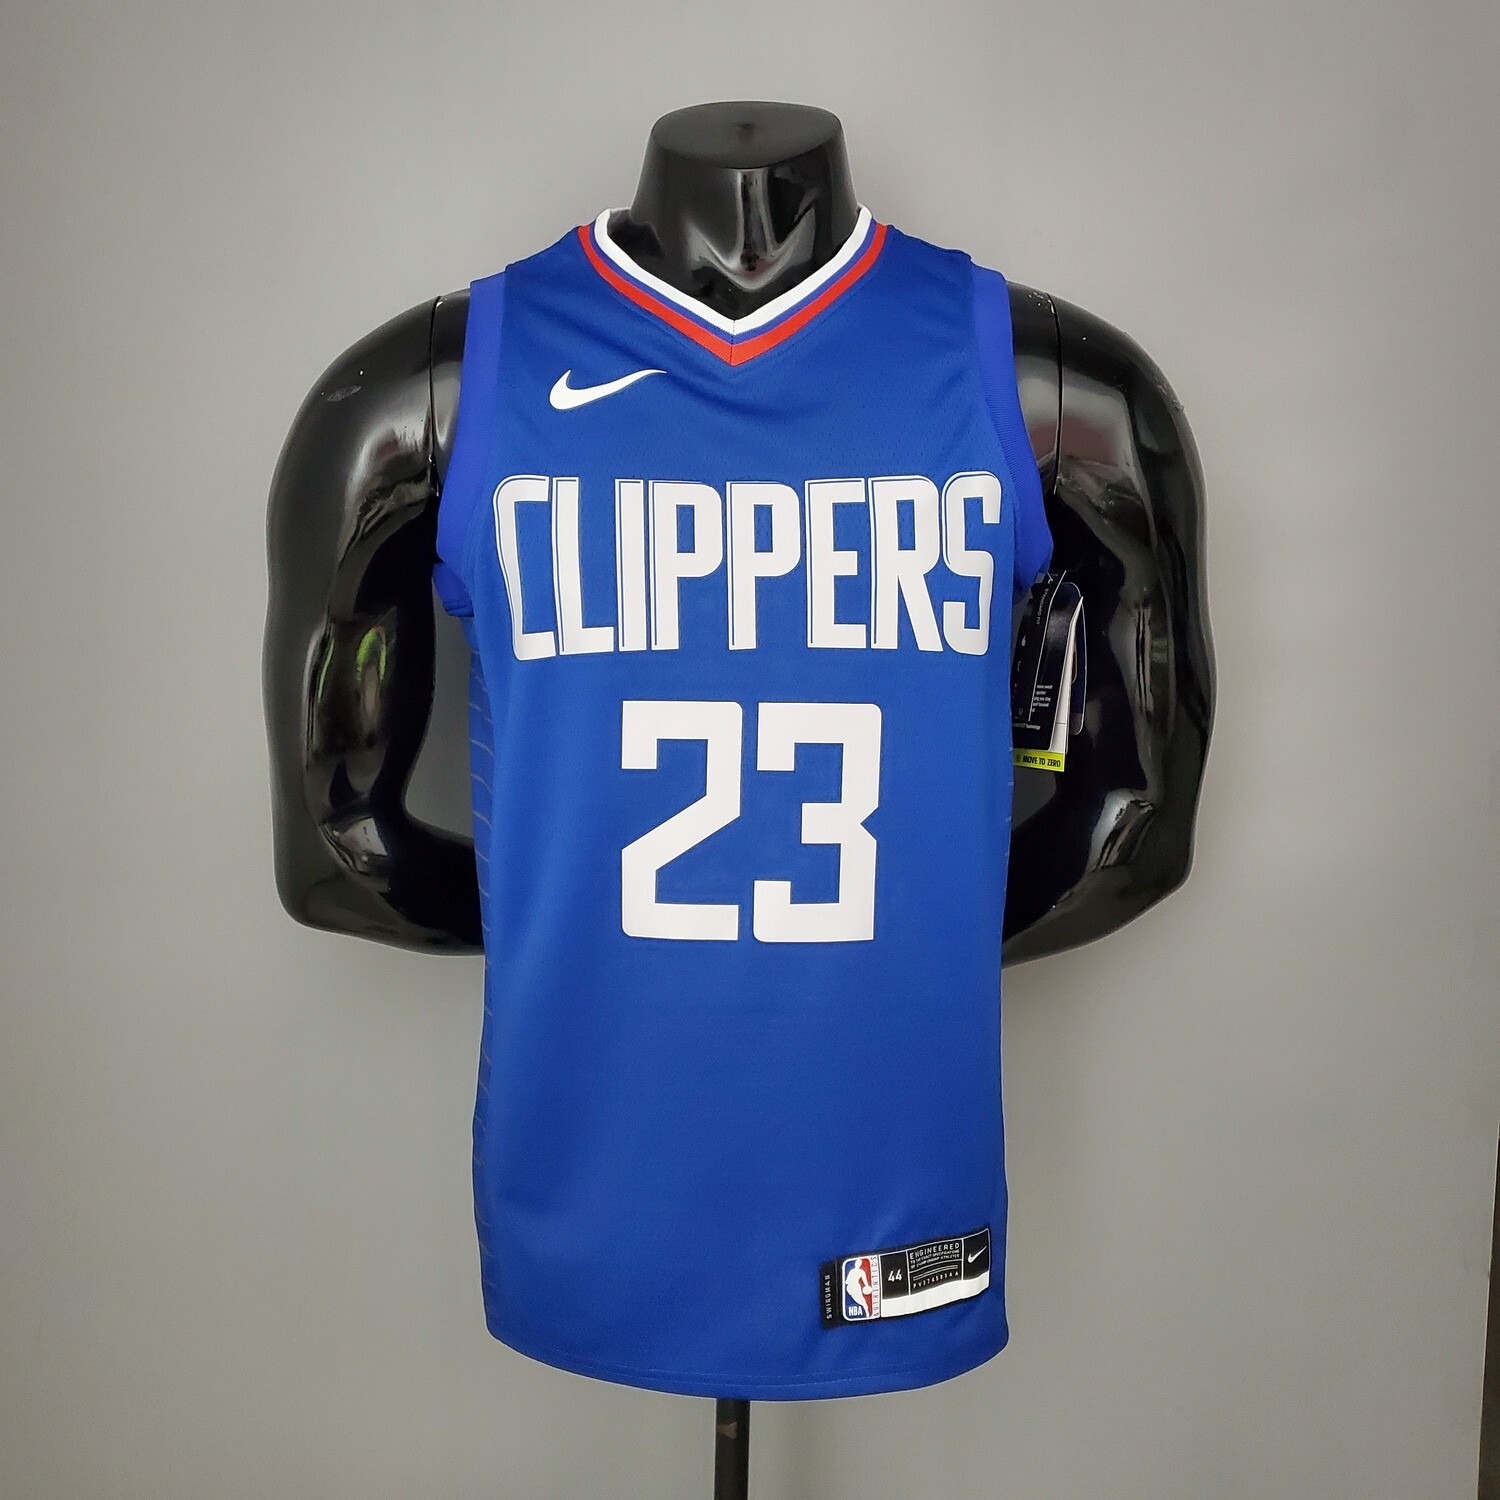 LOS ANGELES CLIPPERS  Maglia Jersey Camisetas CLIPPERS A scelta fra le foto Choice from Photo 6 modelli tra cui scegliere 6 models to choice